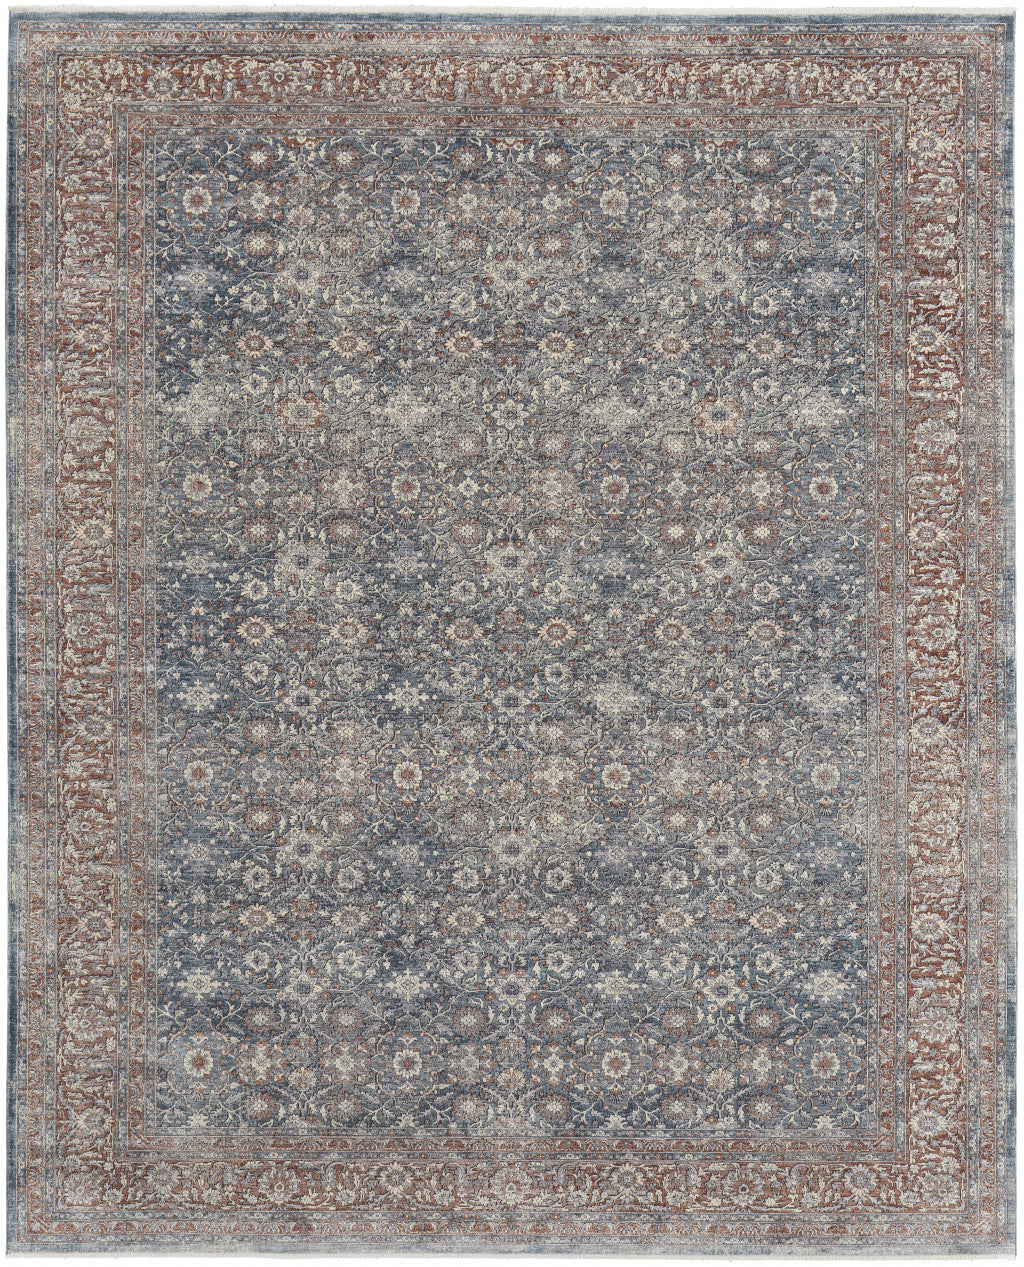 5' X 7' Blue And Red Floral Power Loom Stain Resistant Area Rug